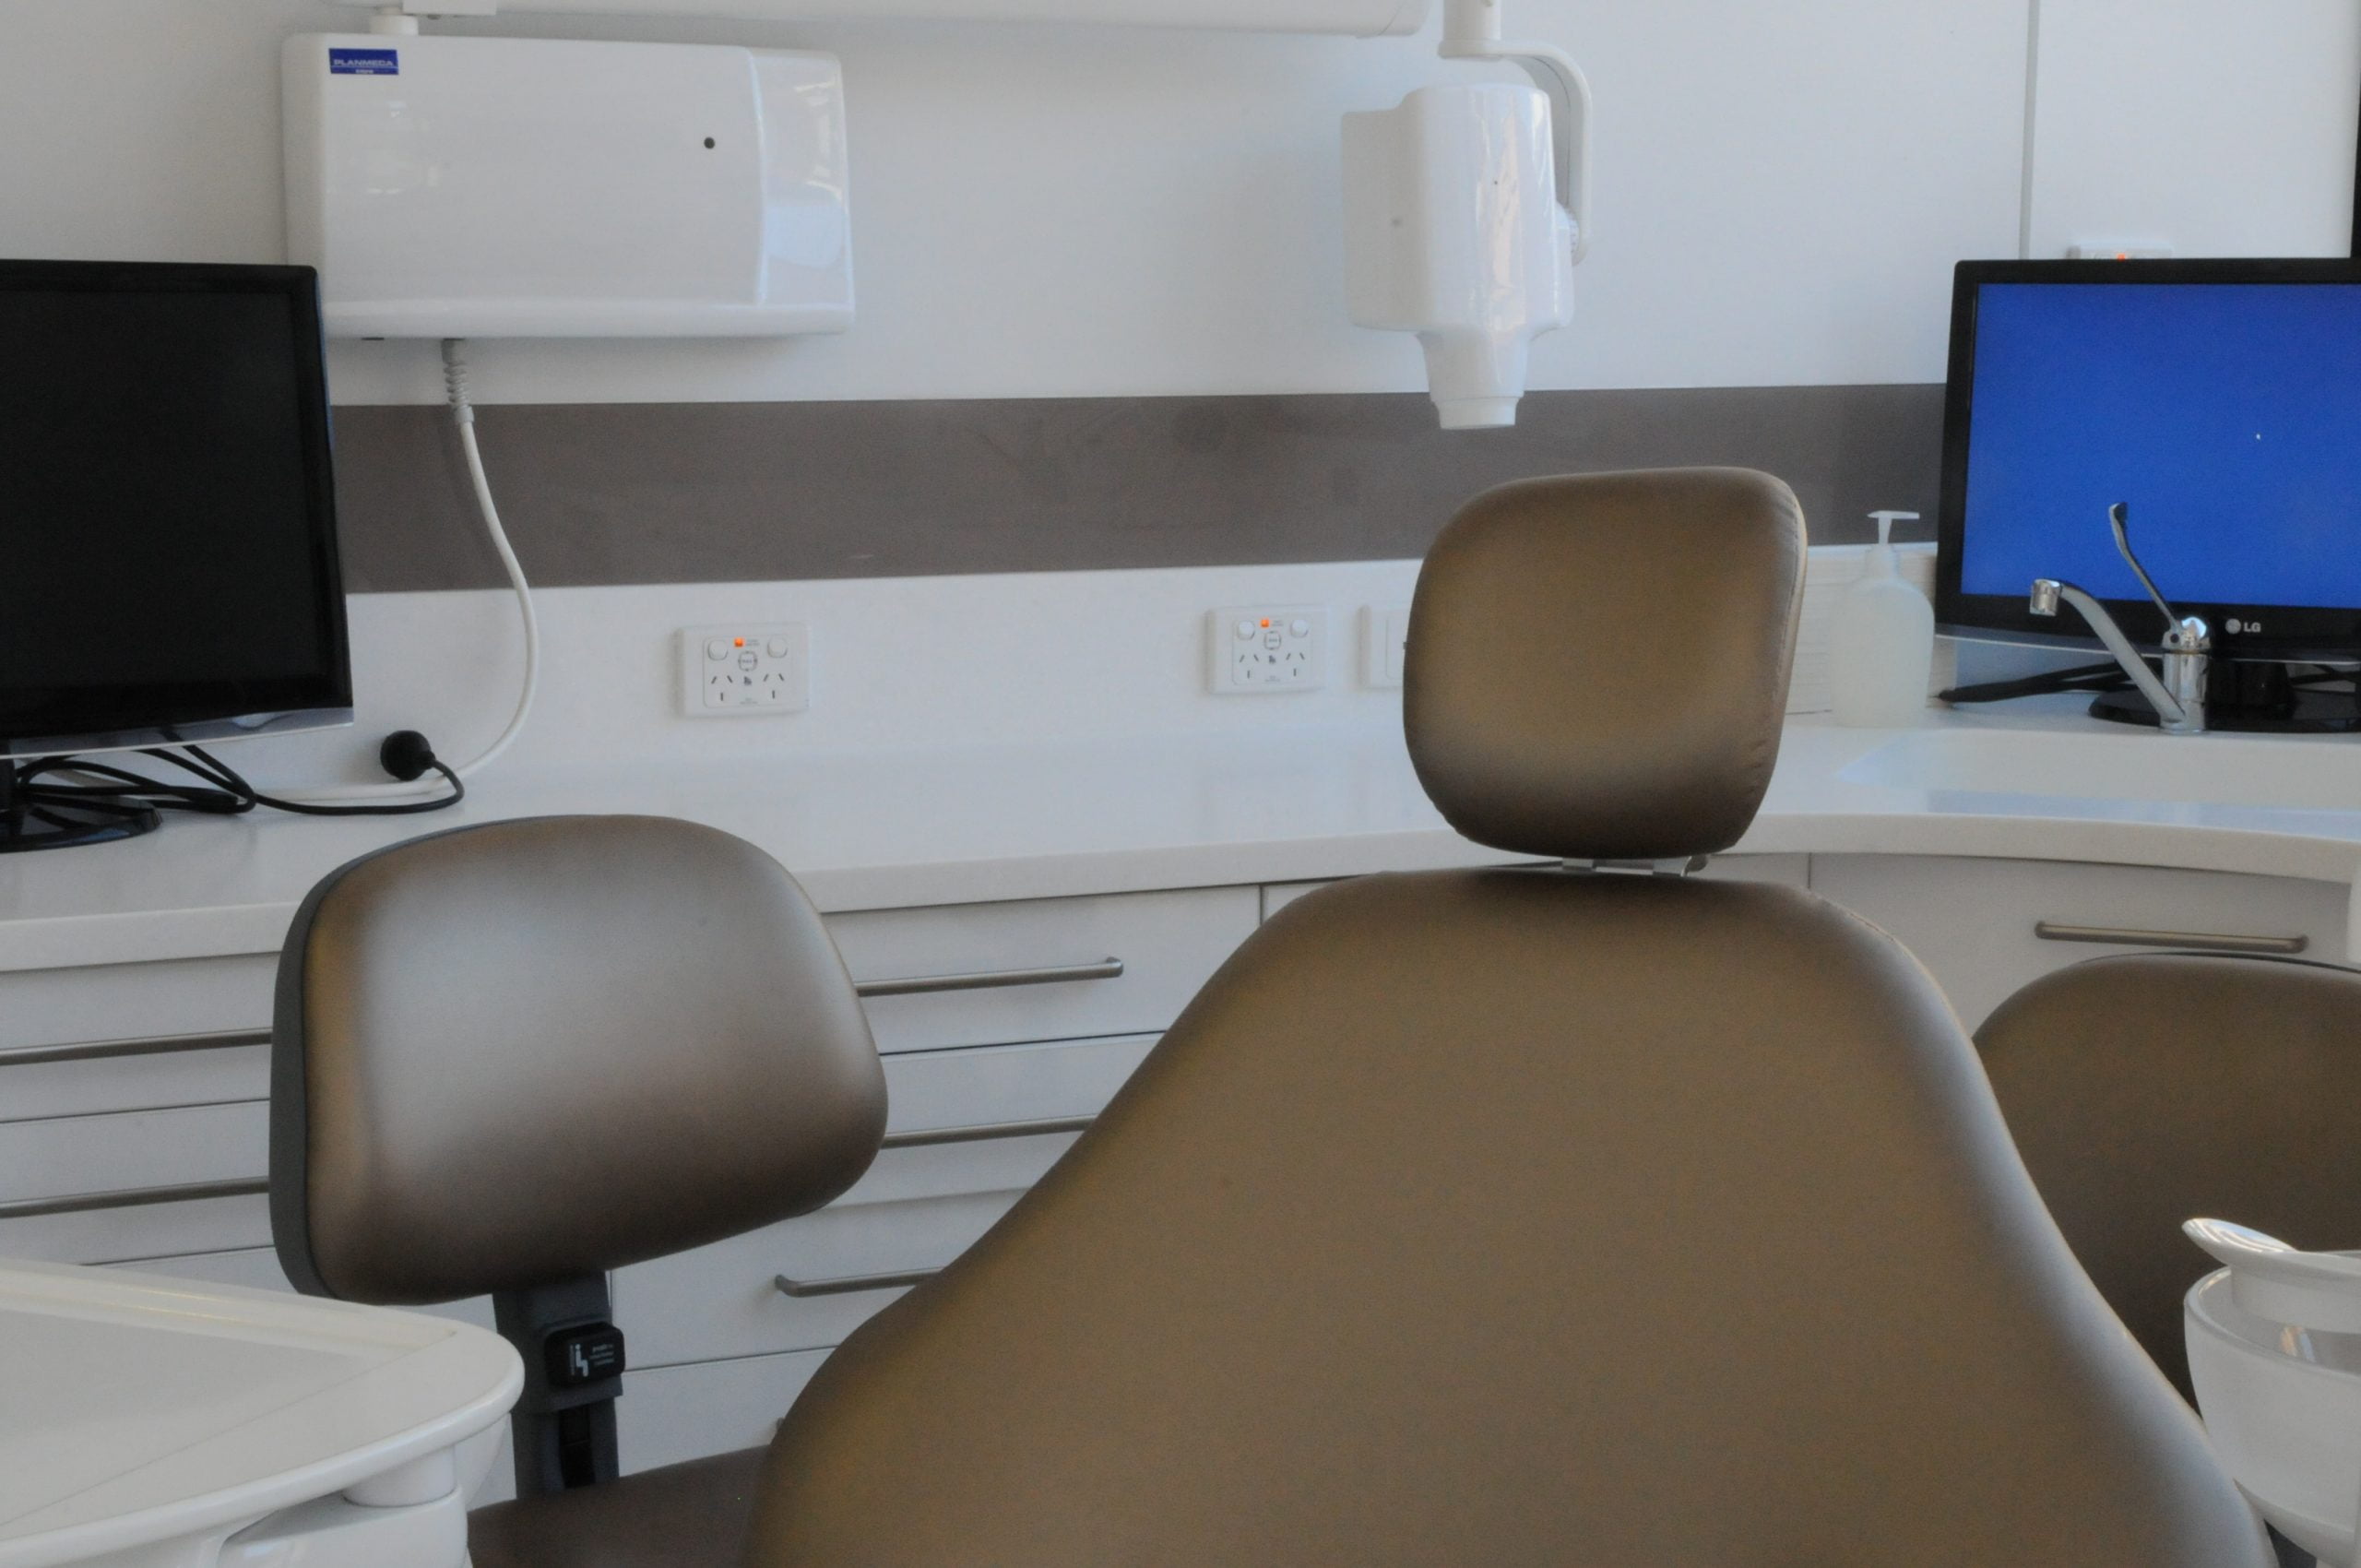 Cosmetic Dentist Adelaide, All-on-4 Teeth-in-a-Day